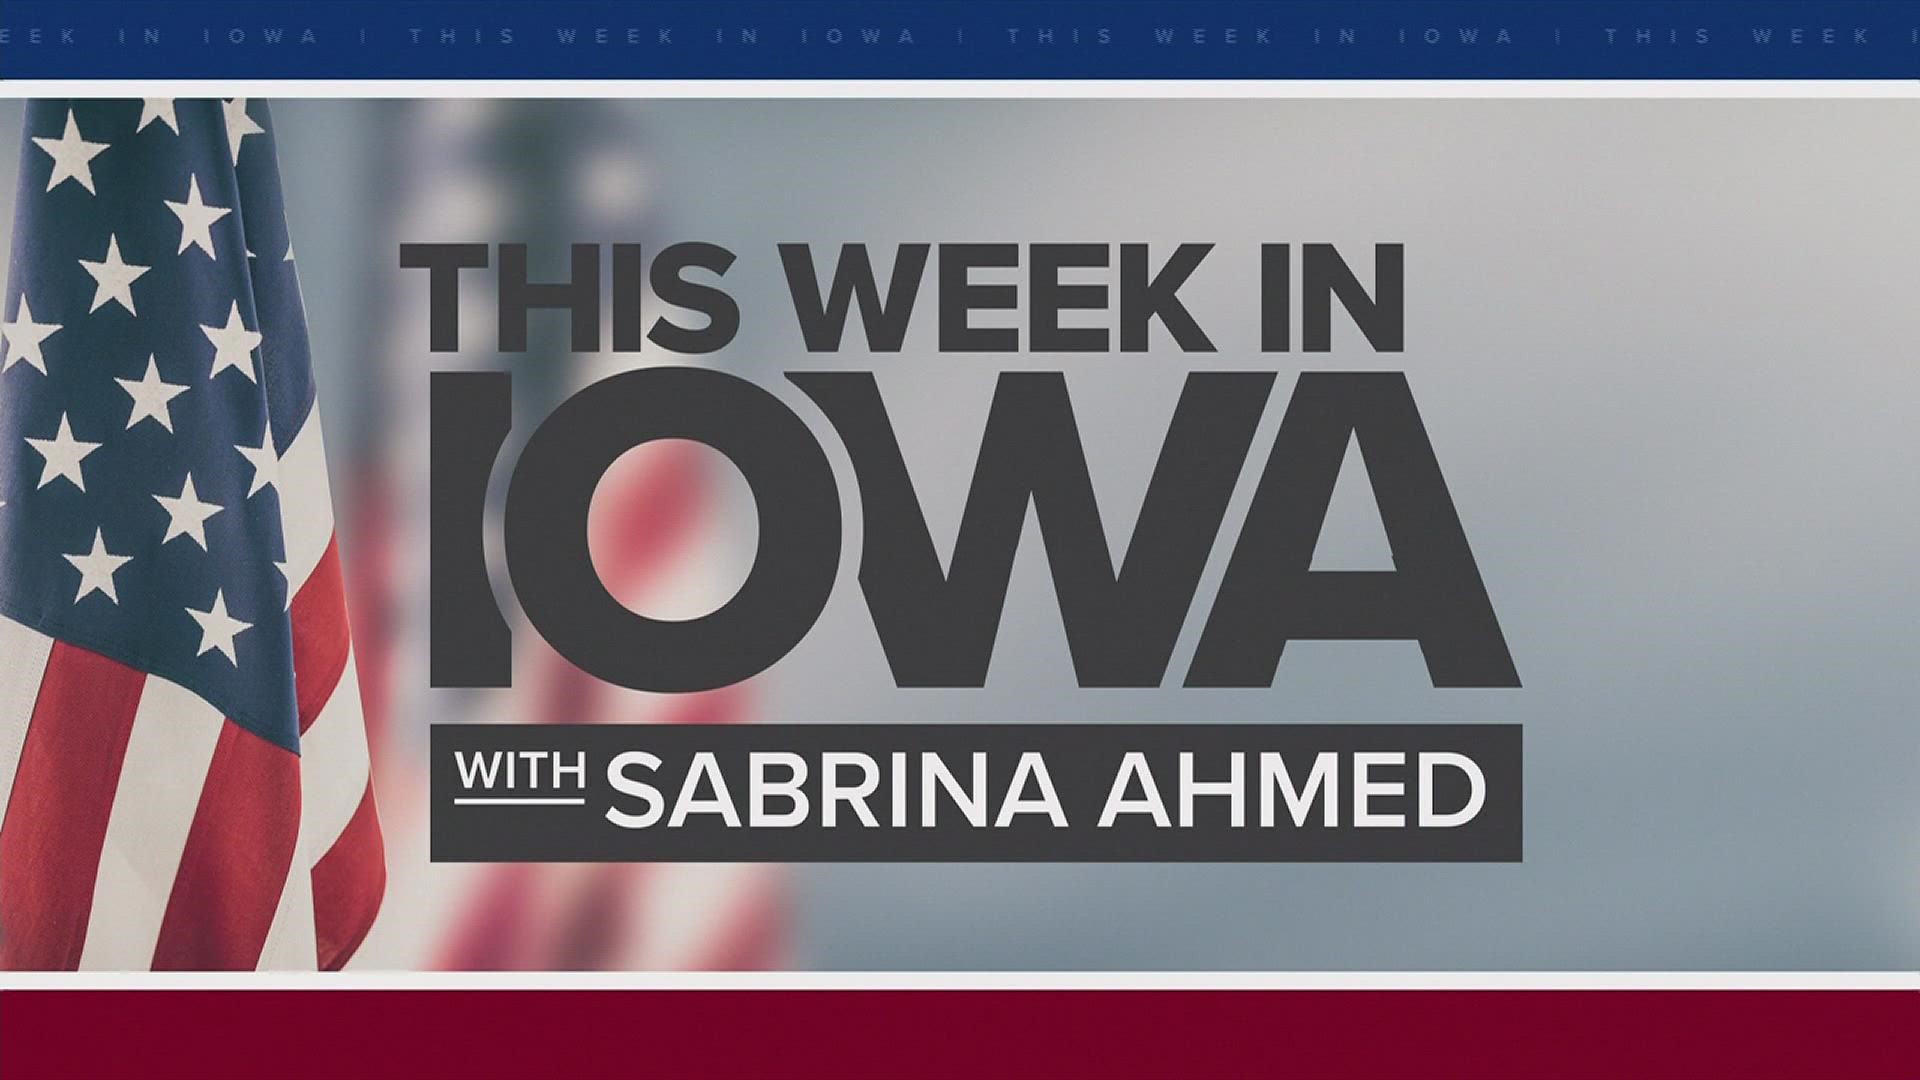 Visit Anchor.fm/TWII for the latest podcast episodes of "This Week in Iowa."